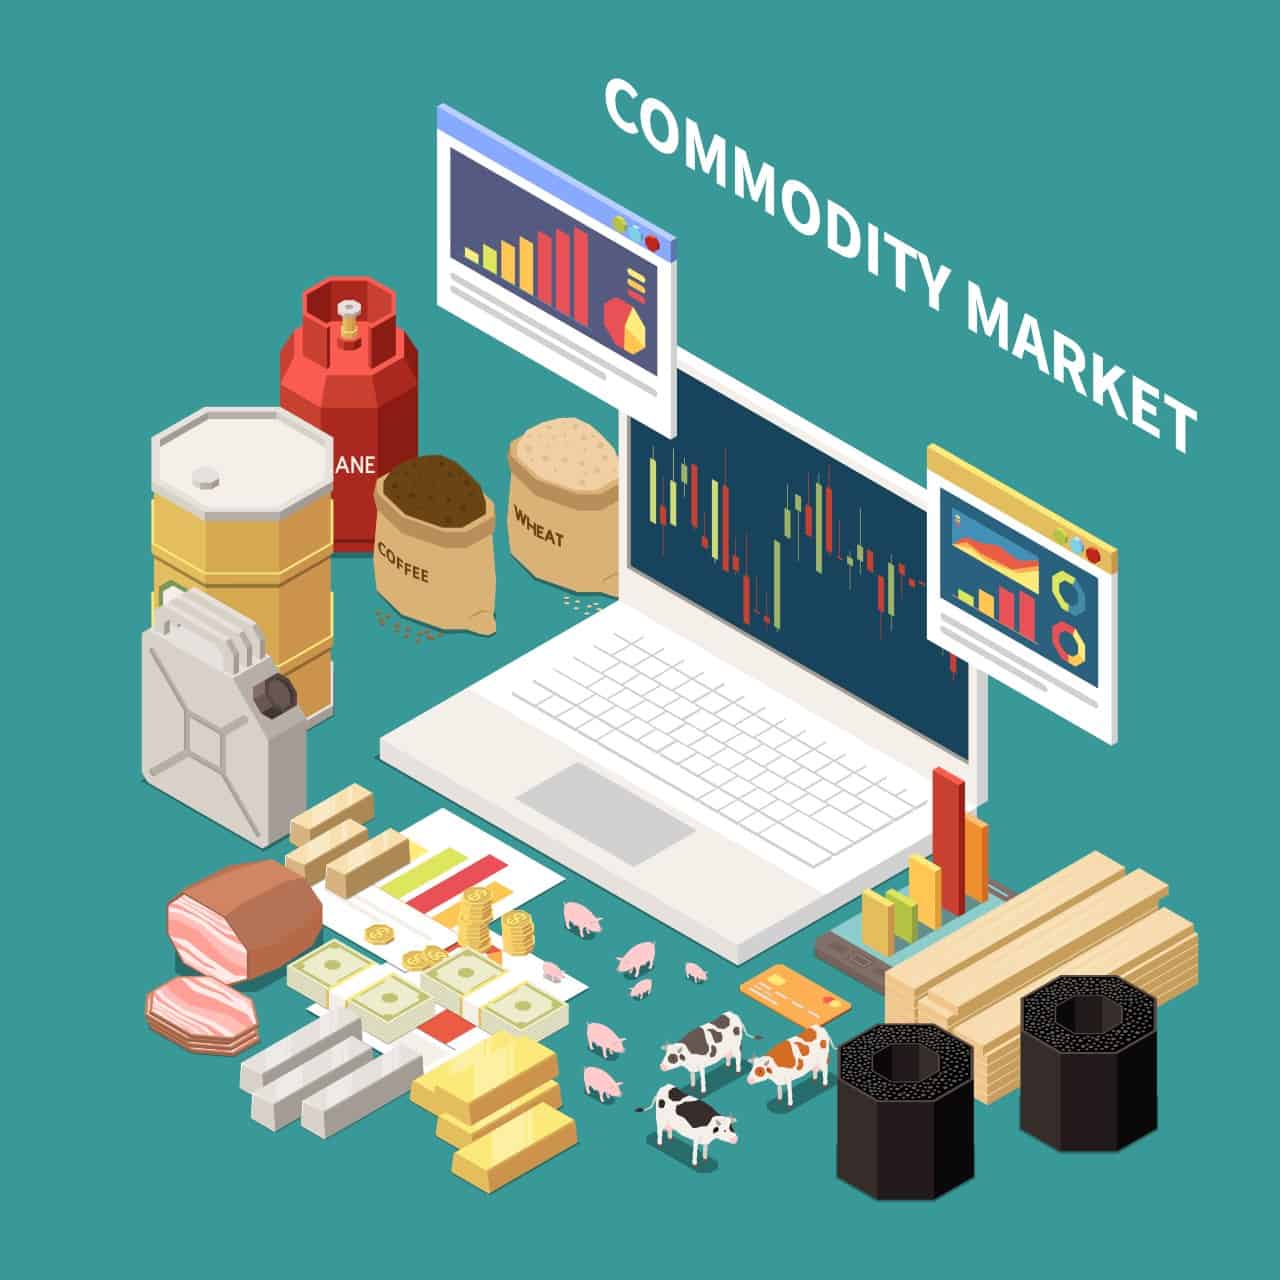 commodity market list of items